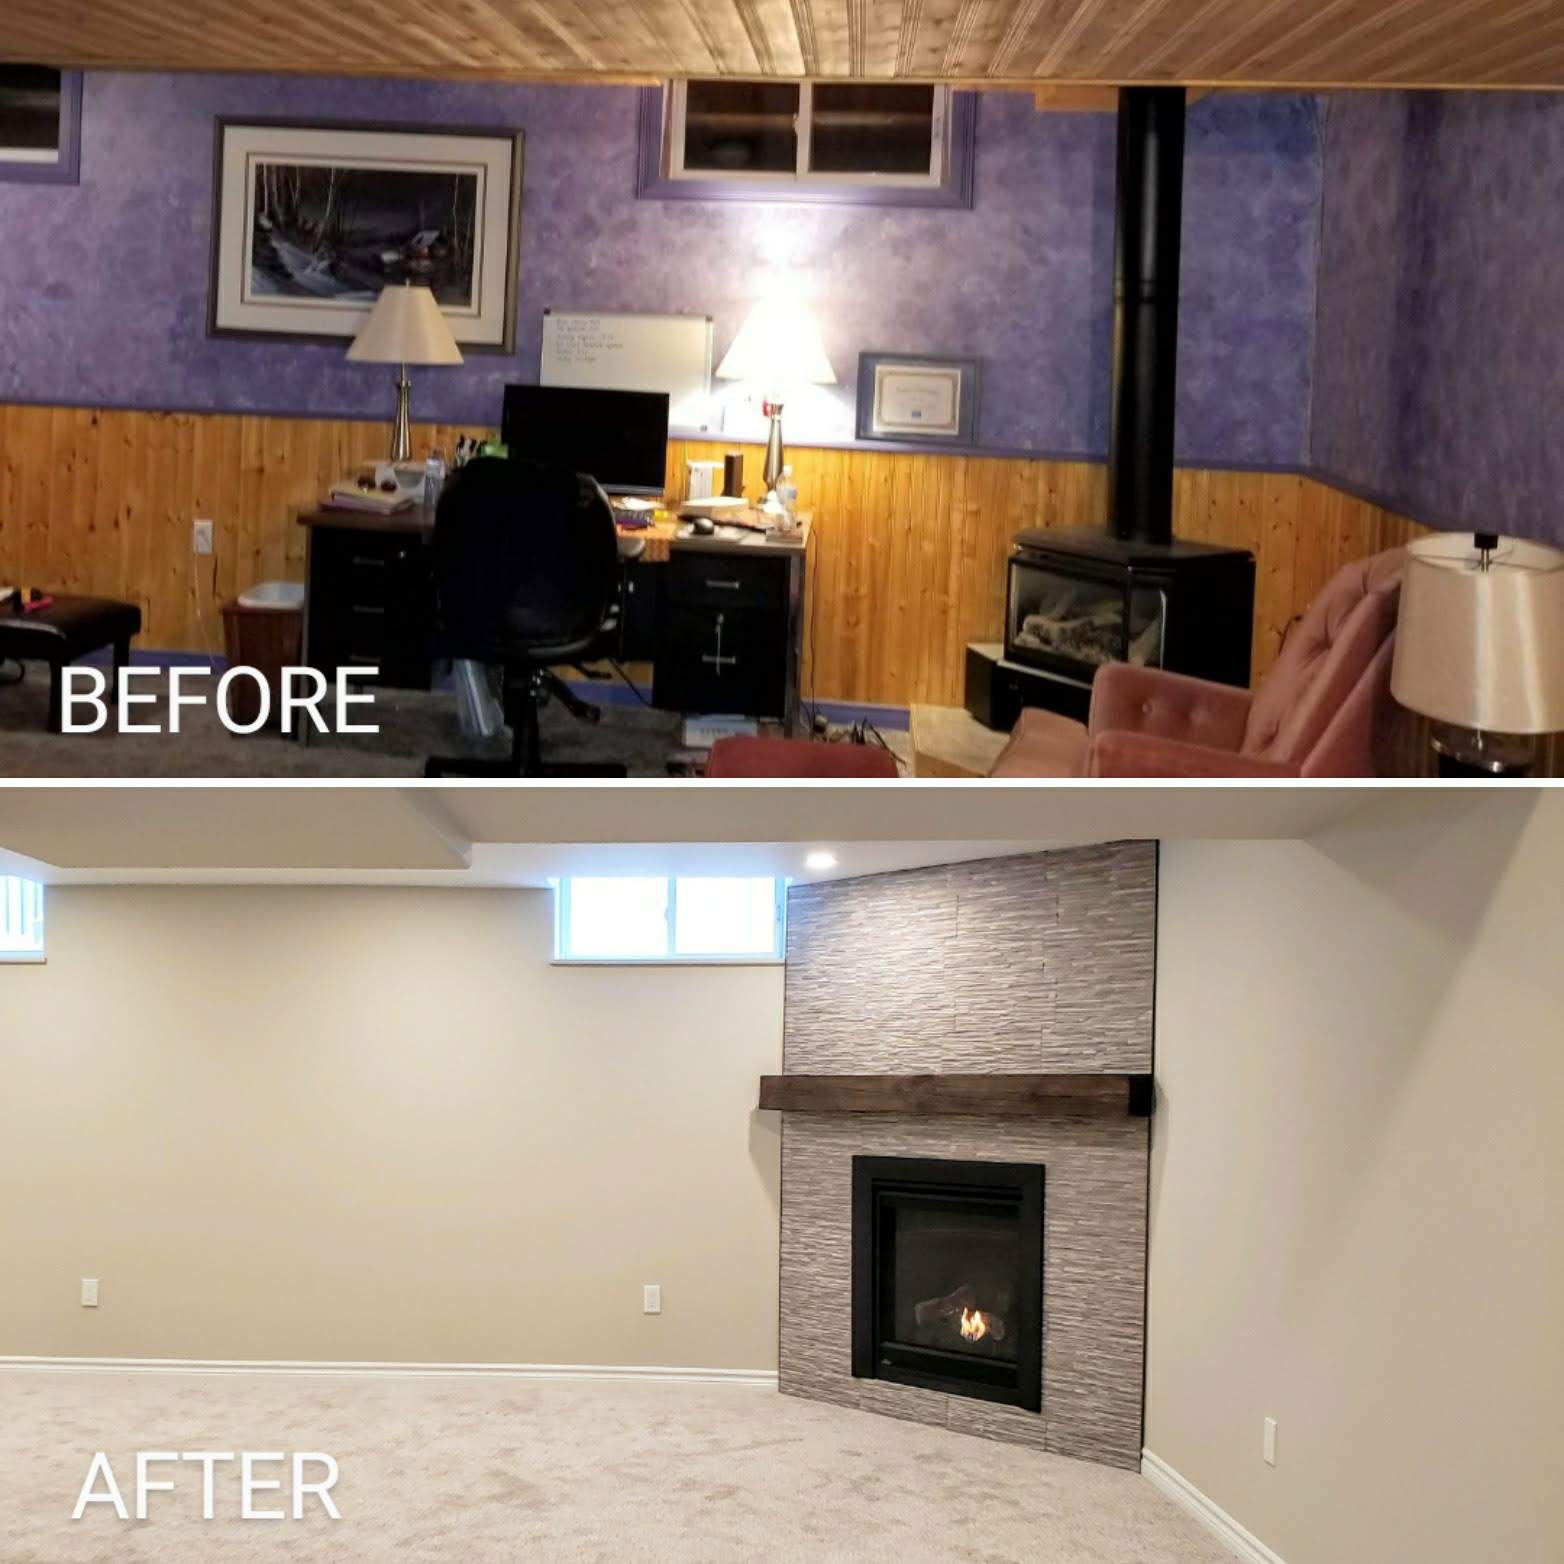 Before and after basement renovation by Germano Creative Interior Contracting Ltd.